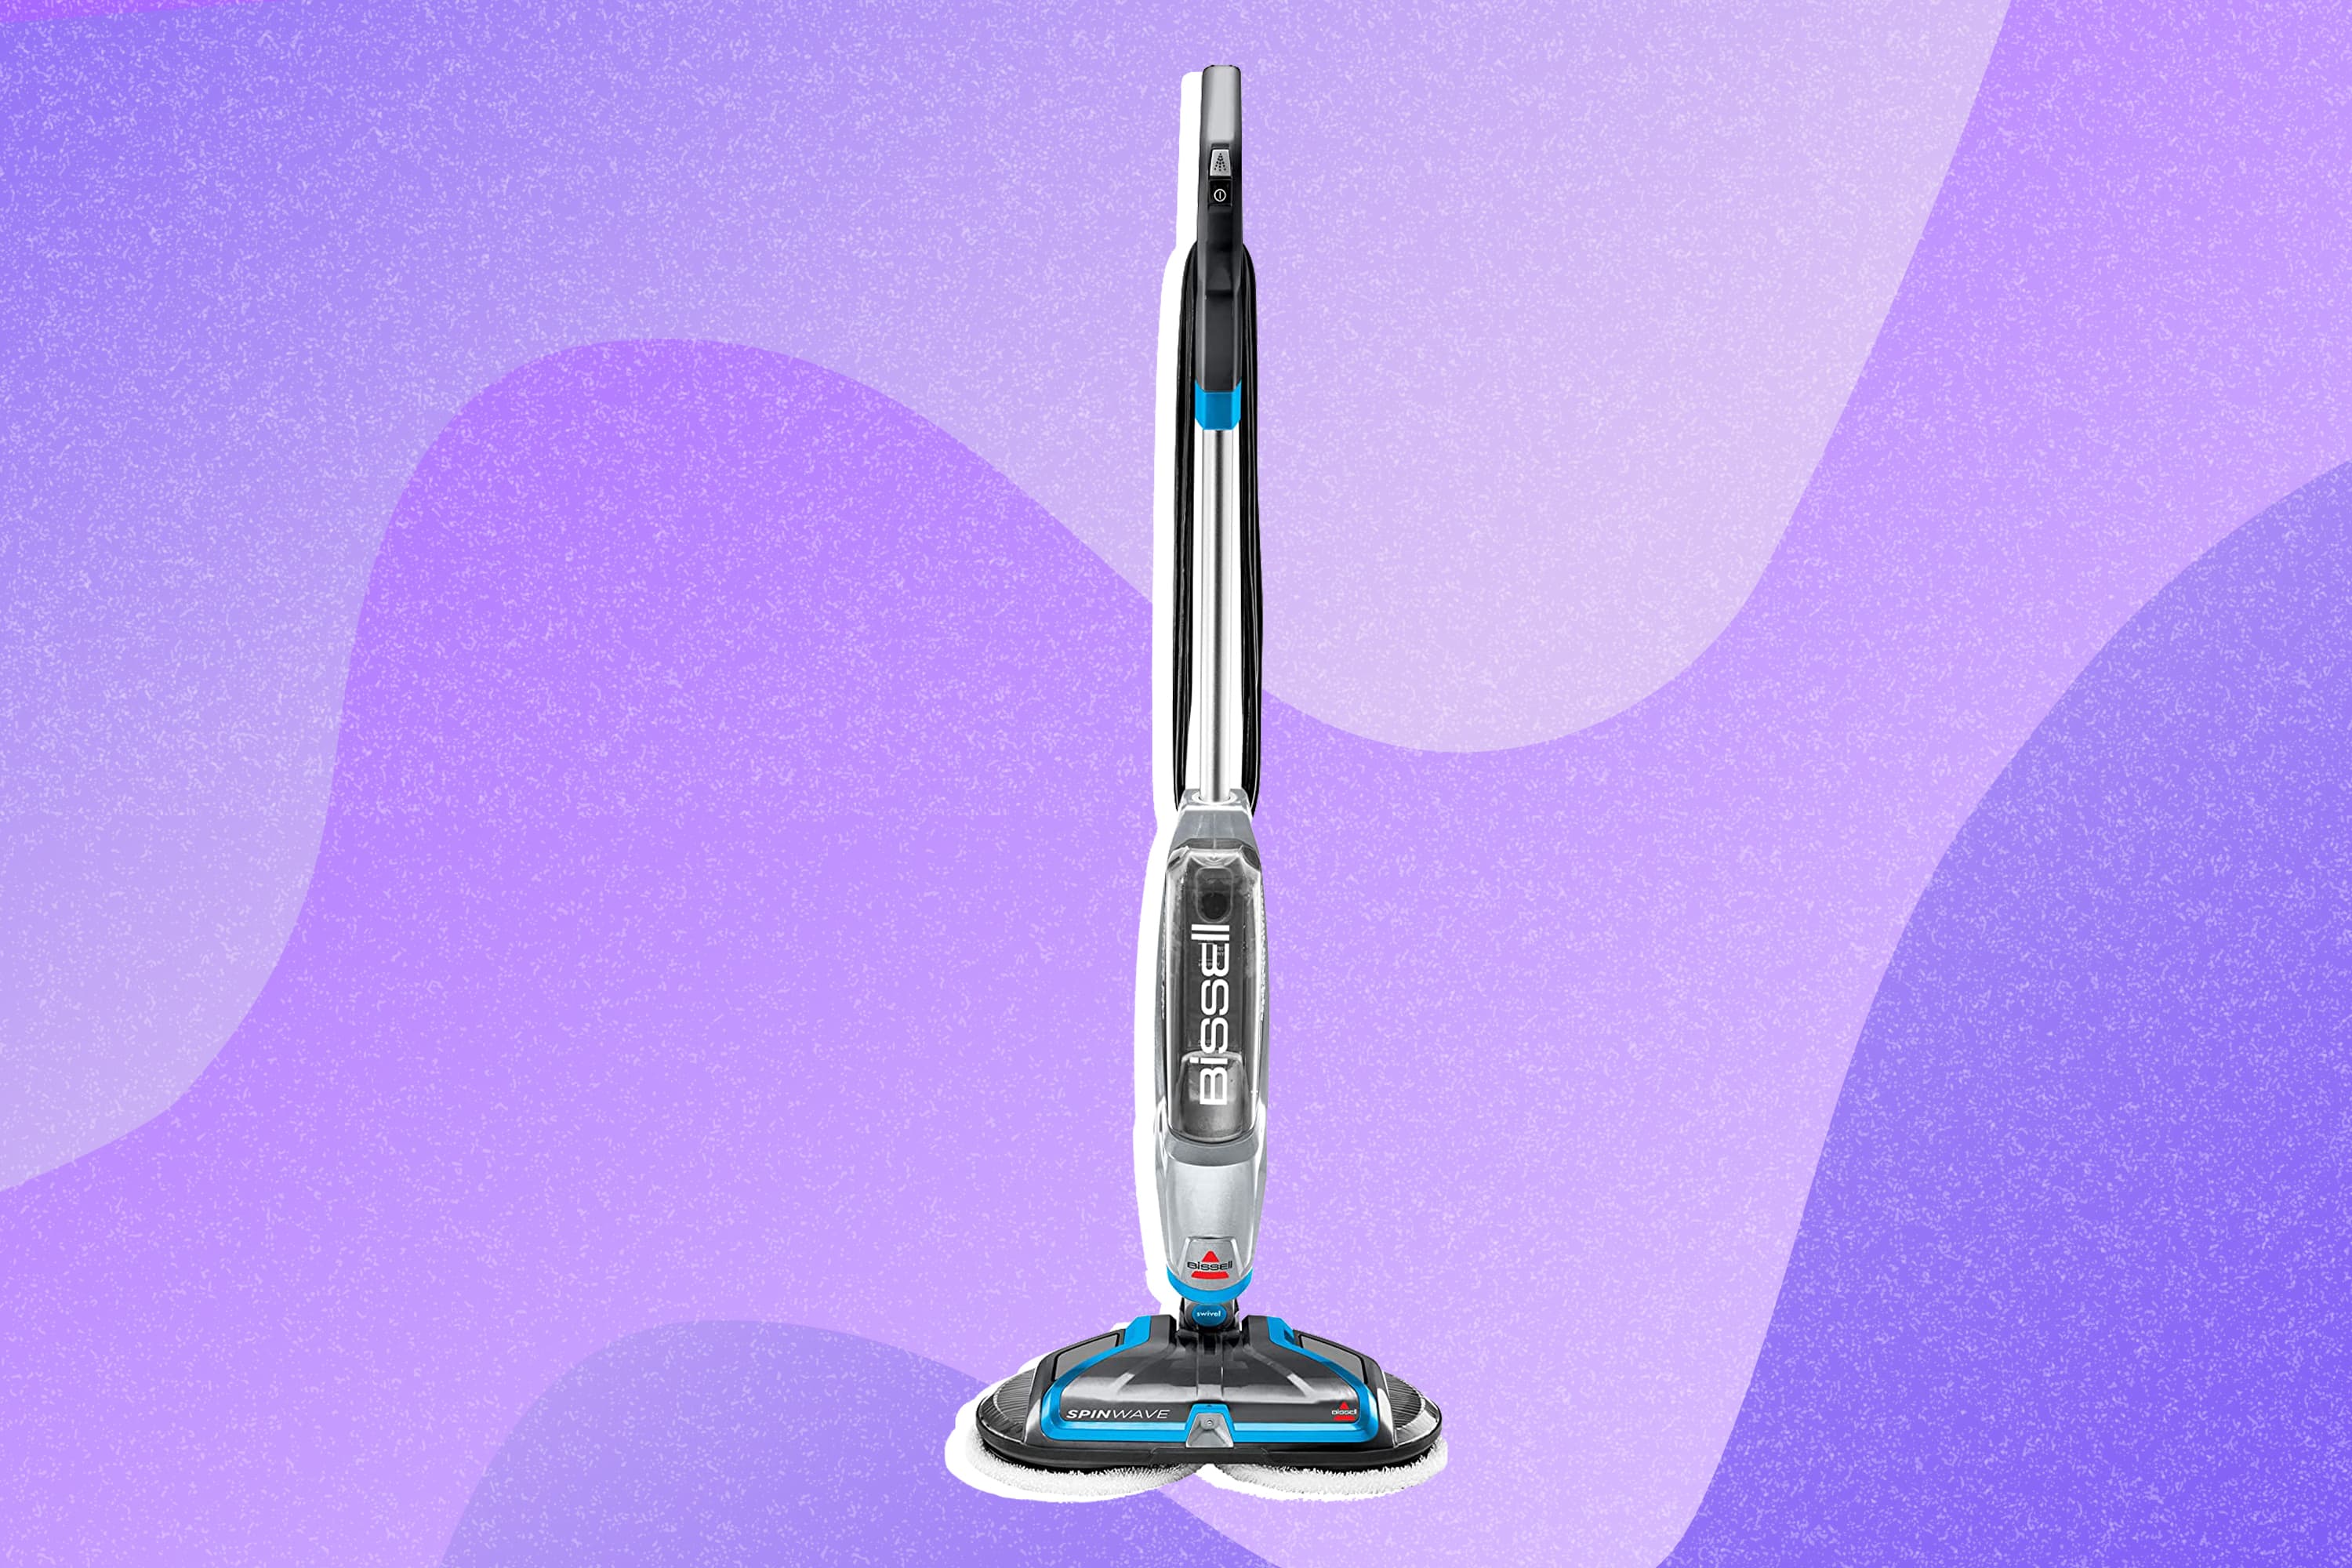 Bissell's Spinwave Mop That Cleans Up Pet Messes Is on Sale at